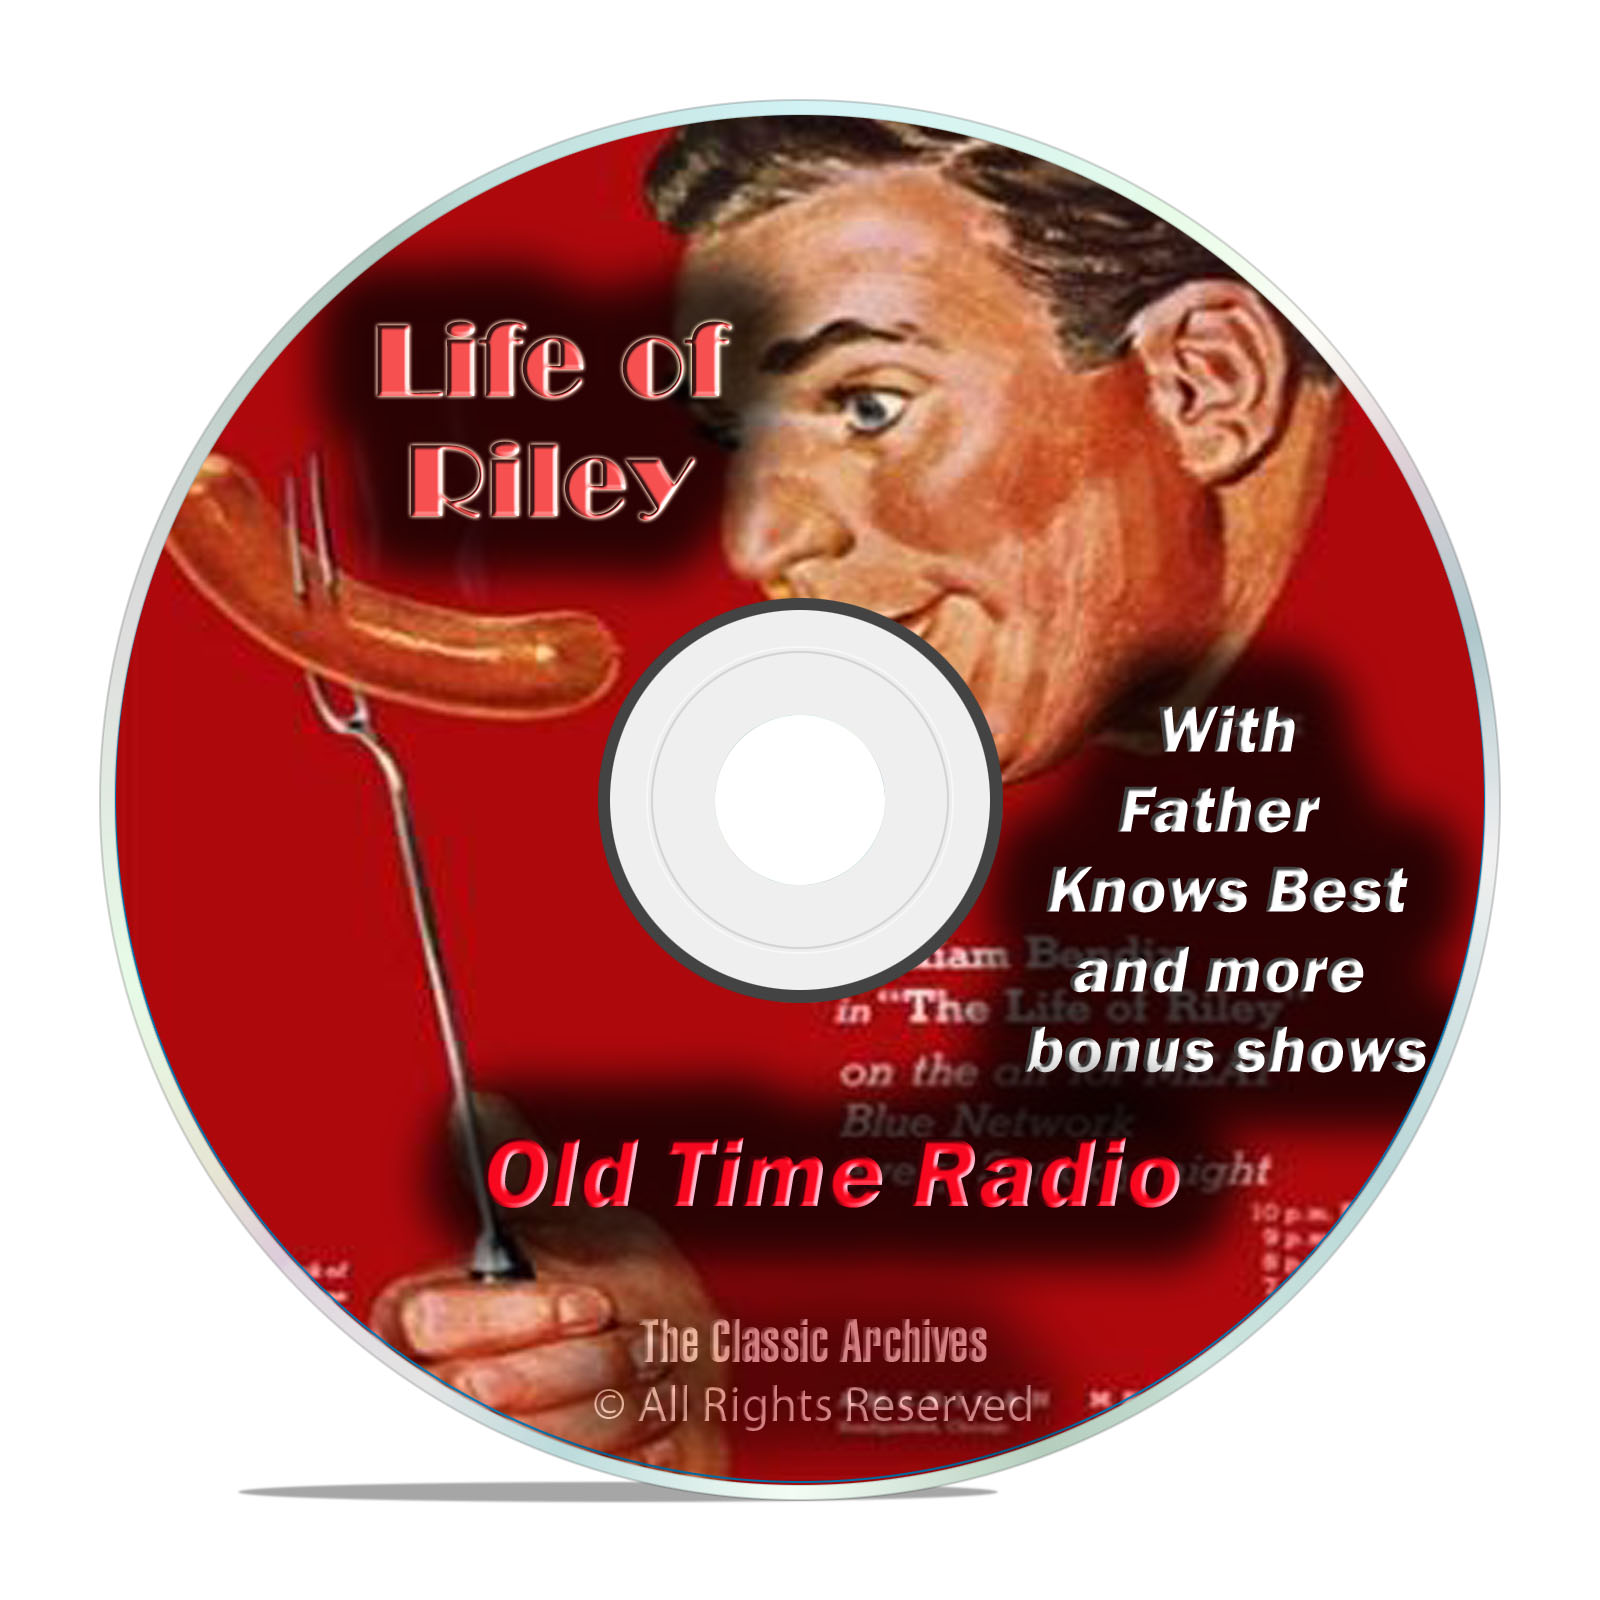 The Life of Riley, Father Knows Best, 607 EPISODES, Old Time Radio, DVD - Click Image to Close